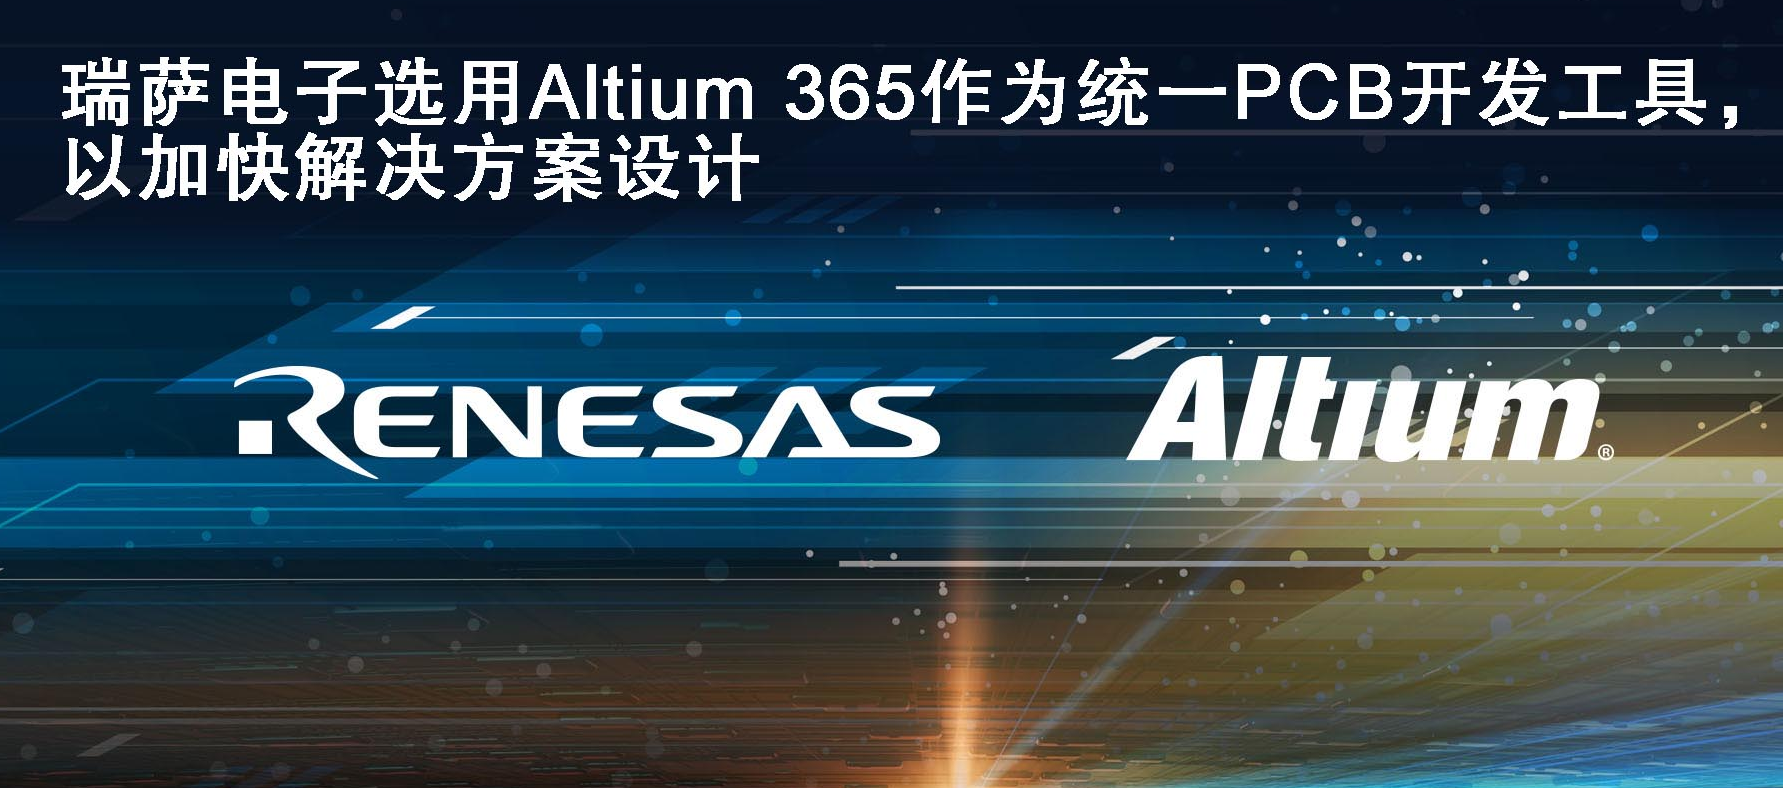 Renesas Electronics selects Altium as a unified PCB development tool and accelerates the solution design of partners and customers